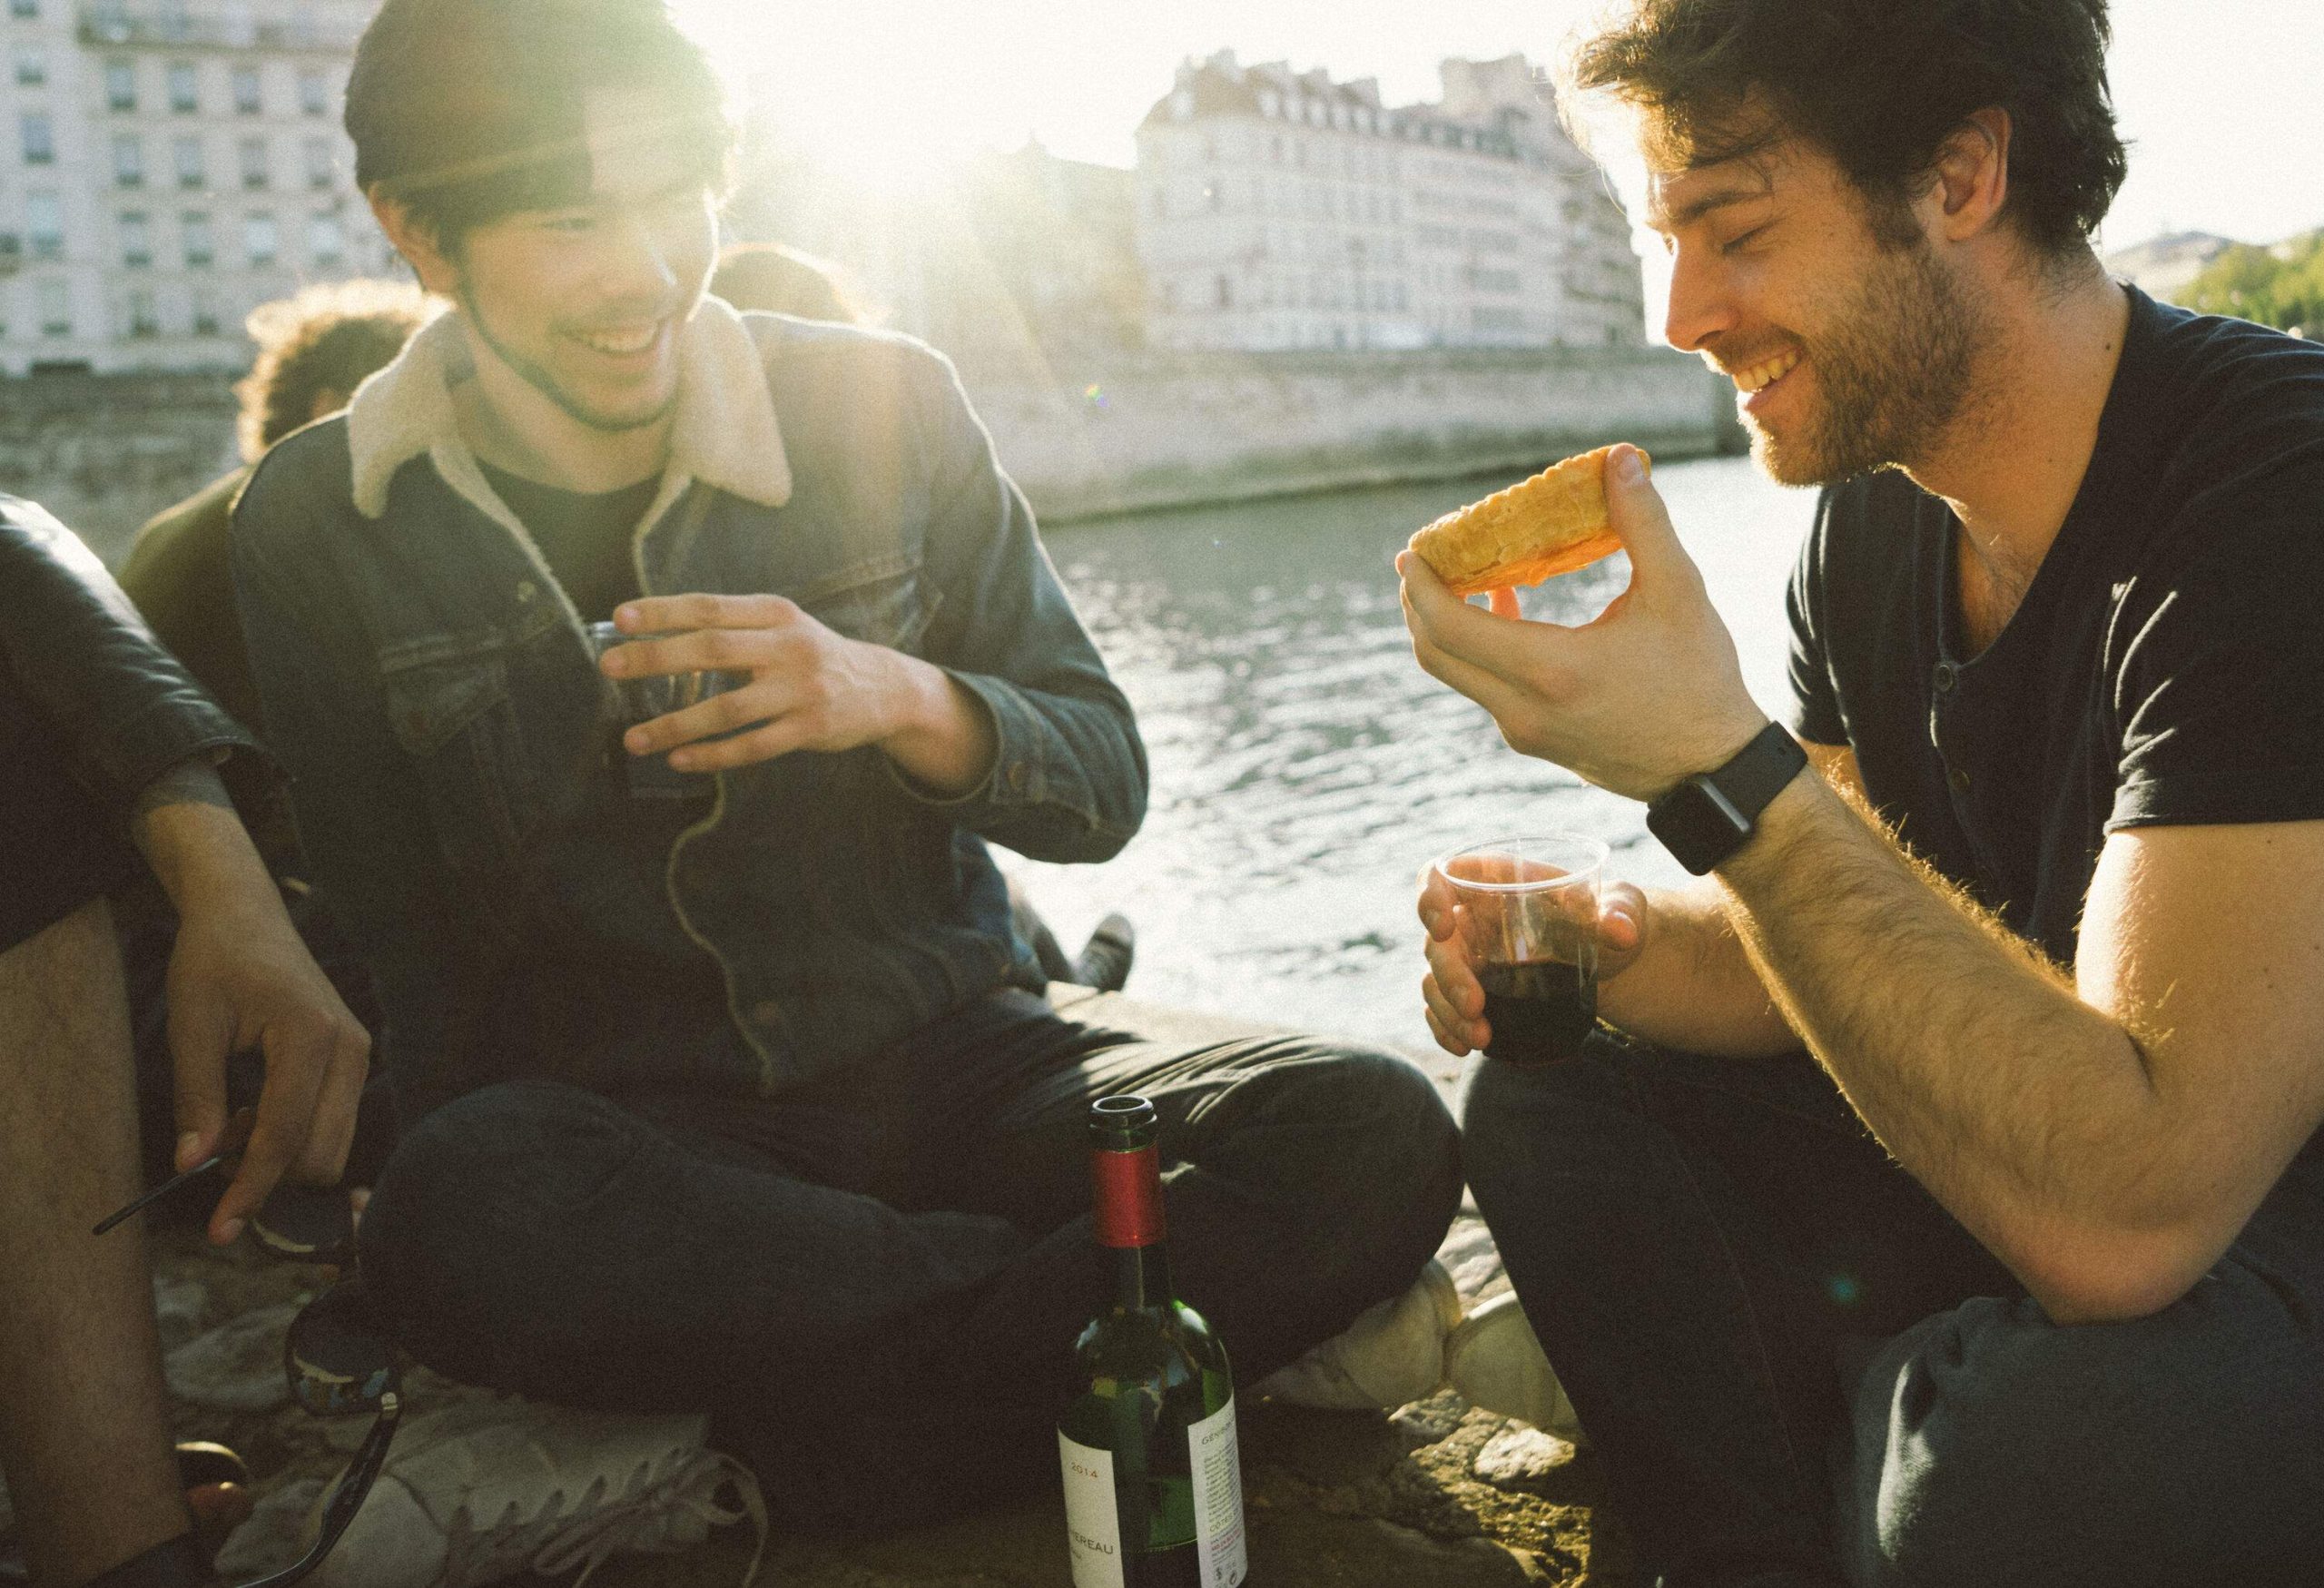 Two men enjoying food and wine by the river as the sun shines through the buildings behind them.